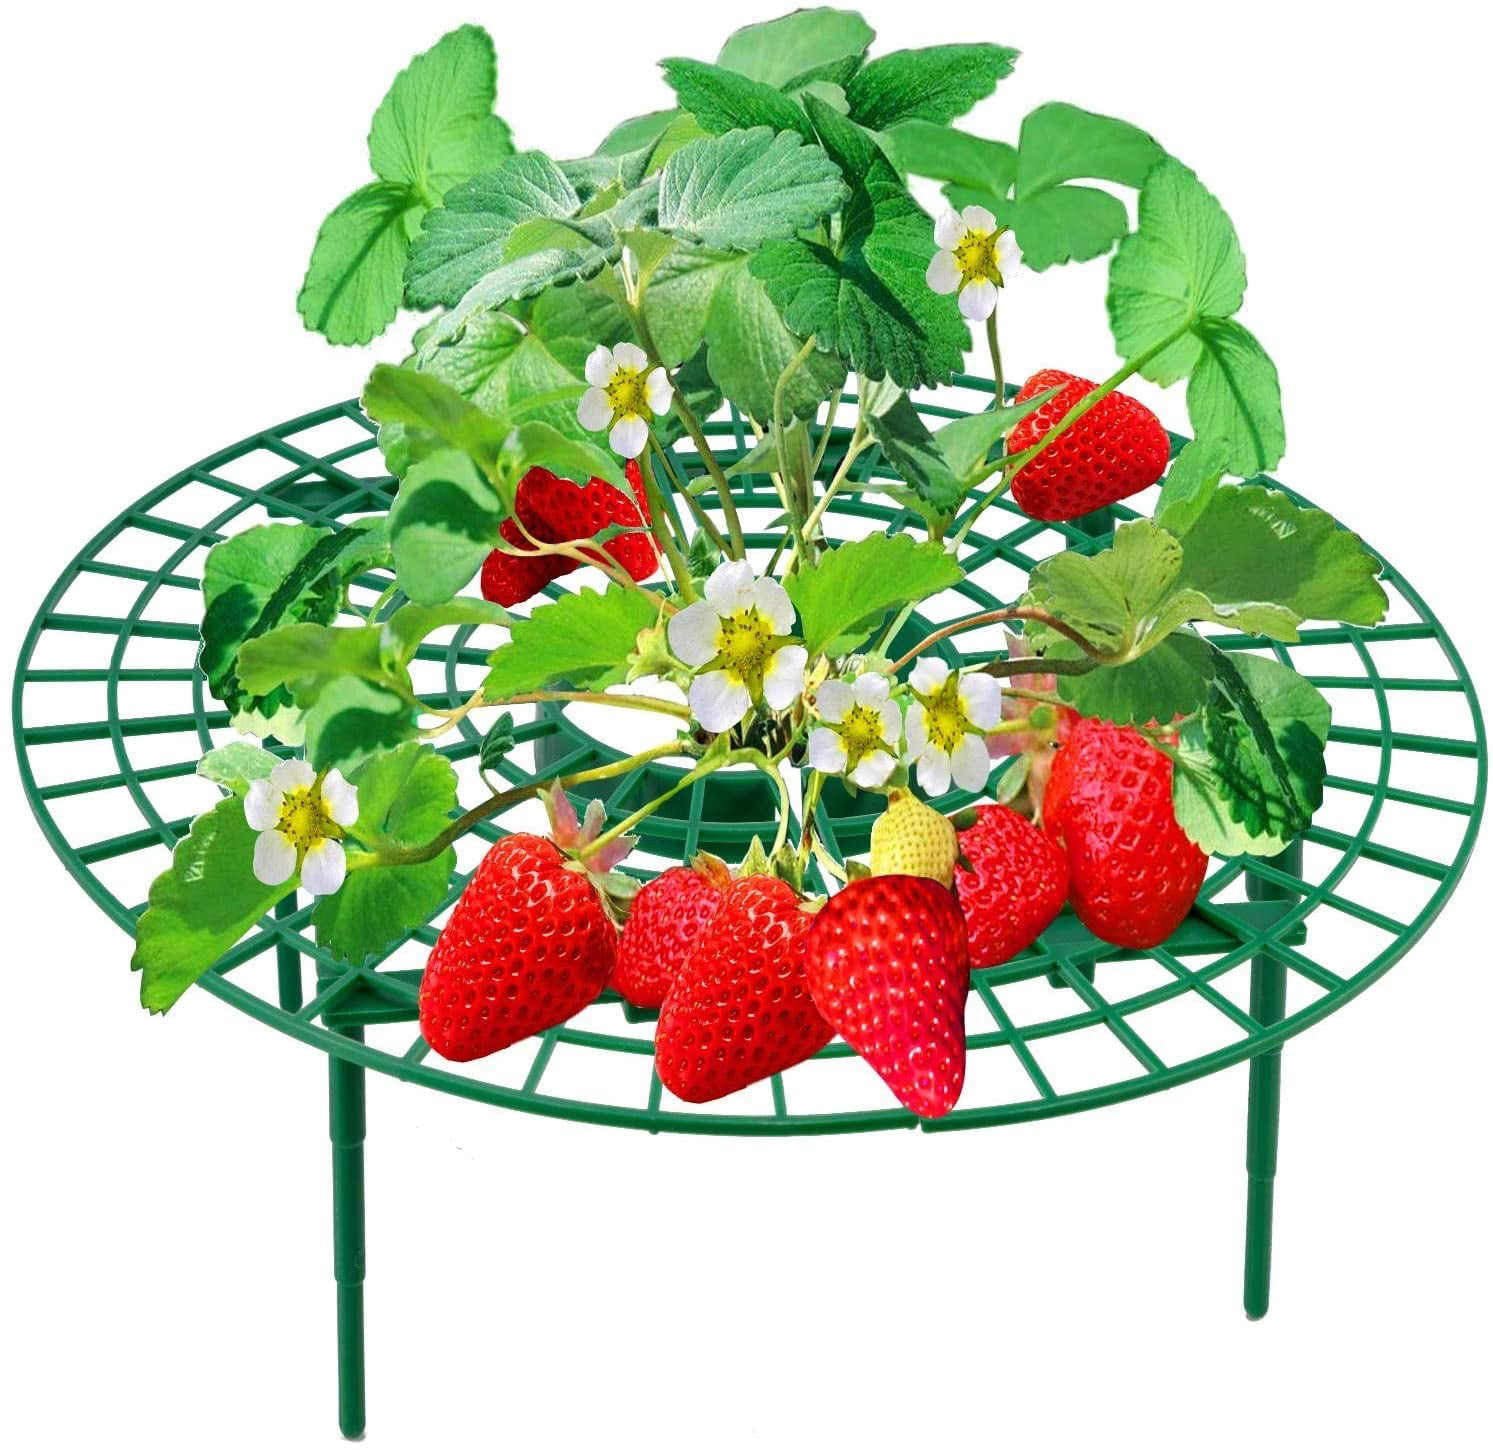 Dailing 10pcs Strawberry Supports Rot and Dirt Strawberry Plant Stand Support Frame Vegetables Flowers Growing Racks Fruit Plant Support Stand Protection of Strawberry Plants from Mold